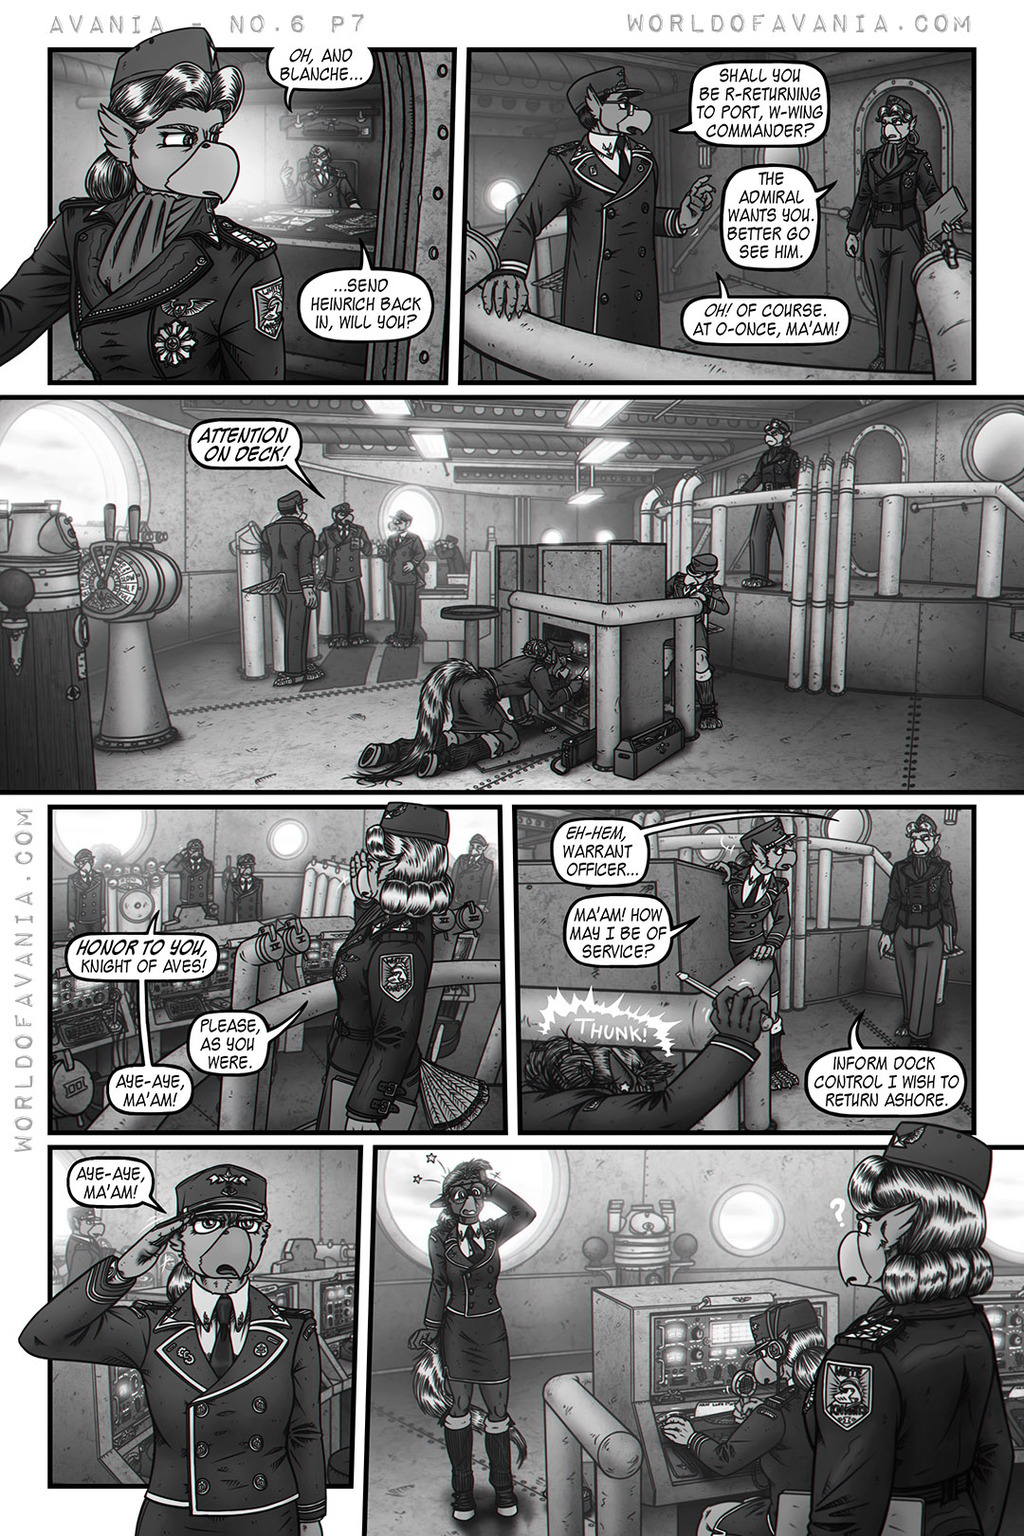 Avania Comic - Issue No.6, Page 7